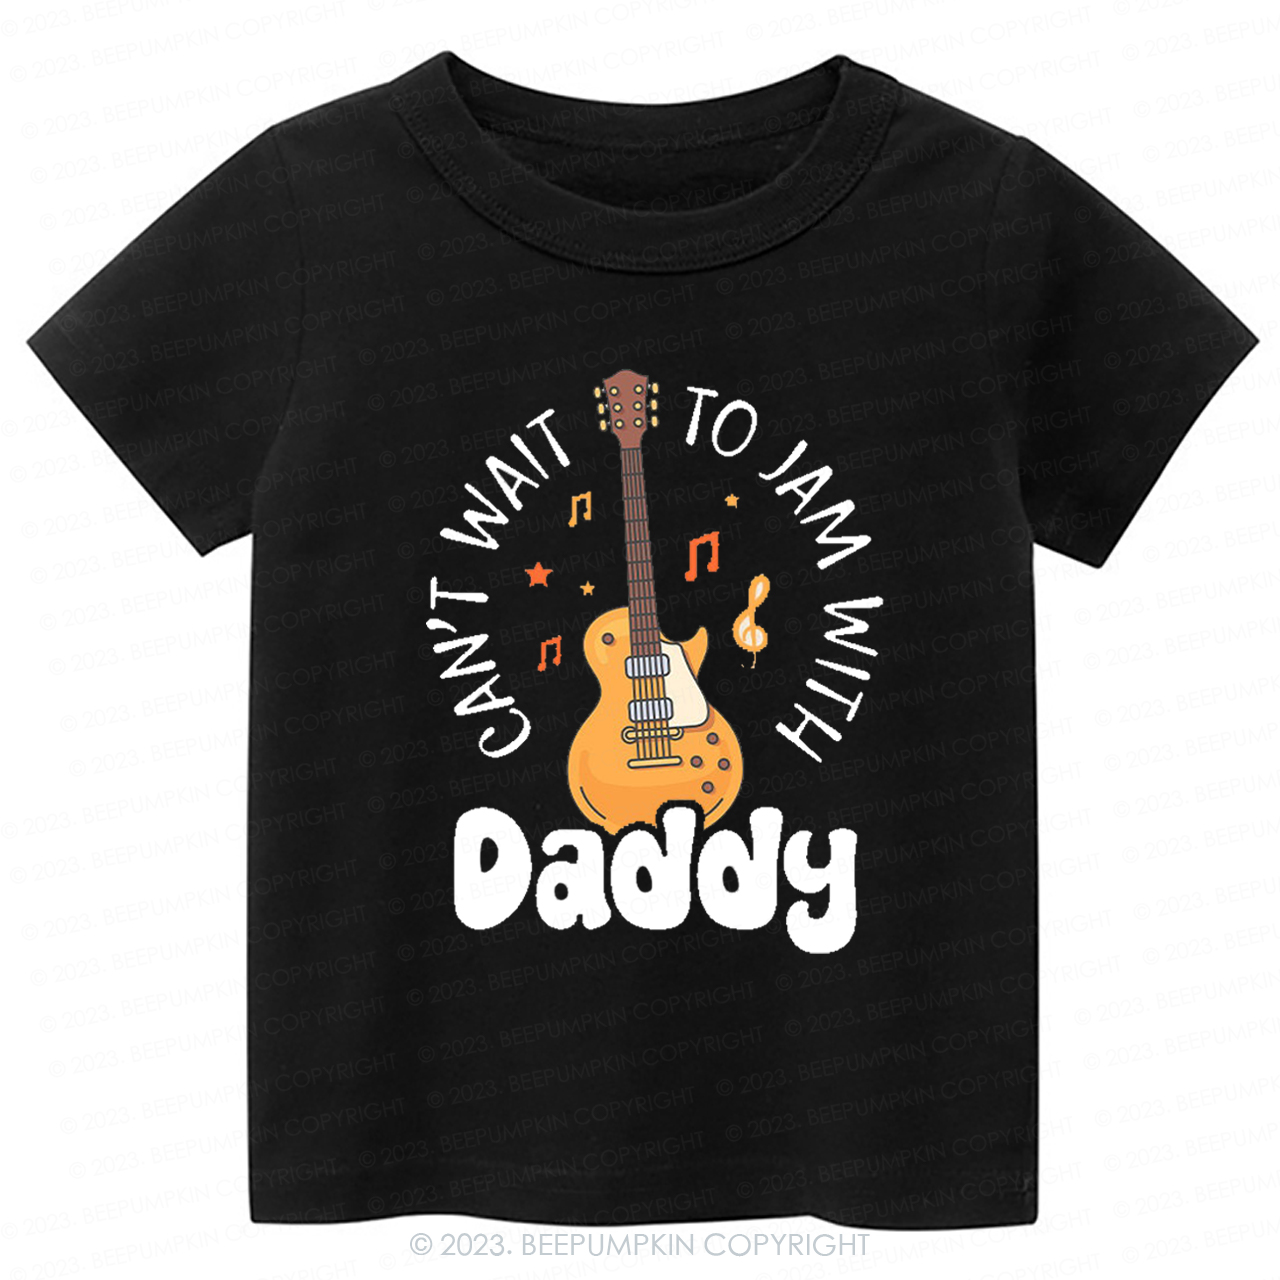 Can't Wait To Jam With Daddy Kids Shirt